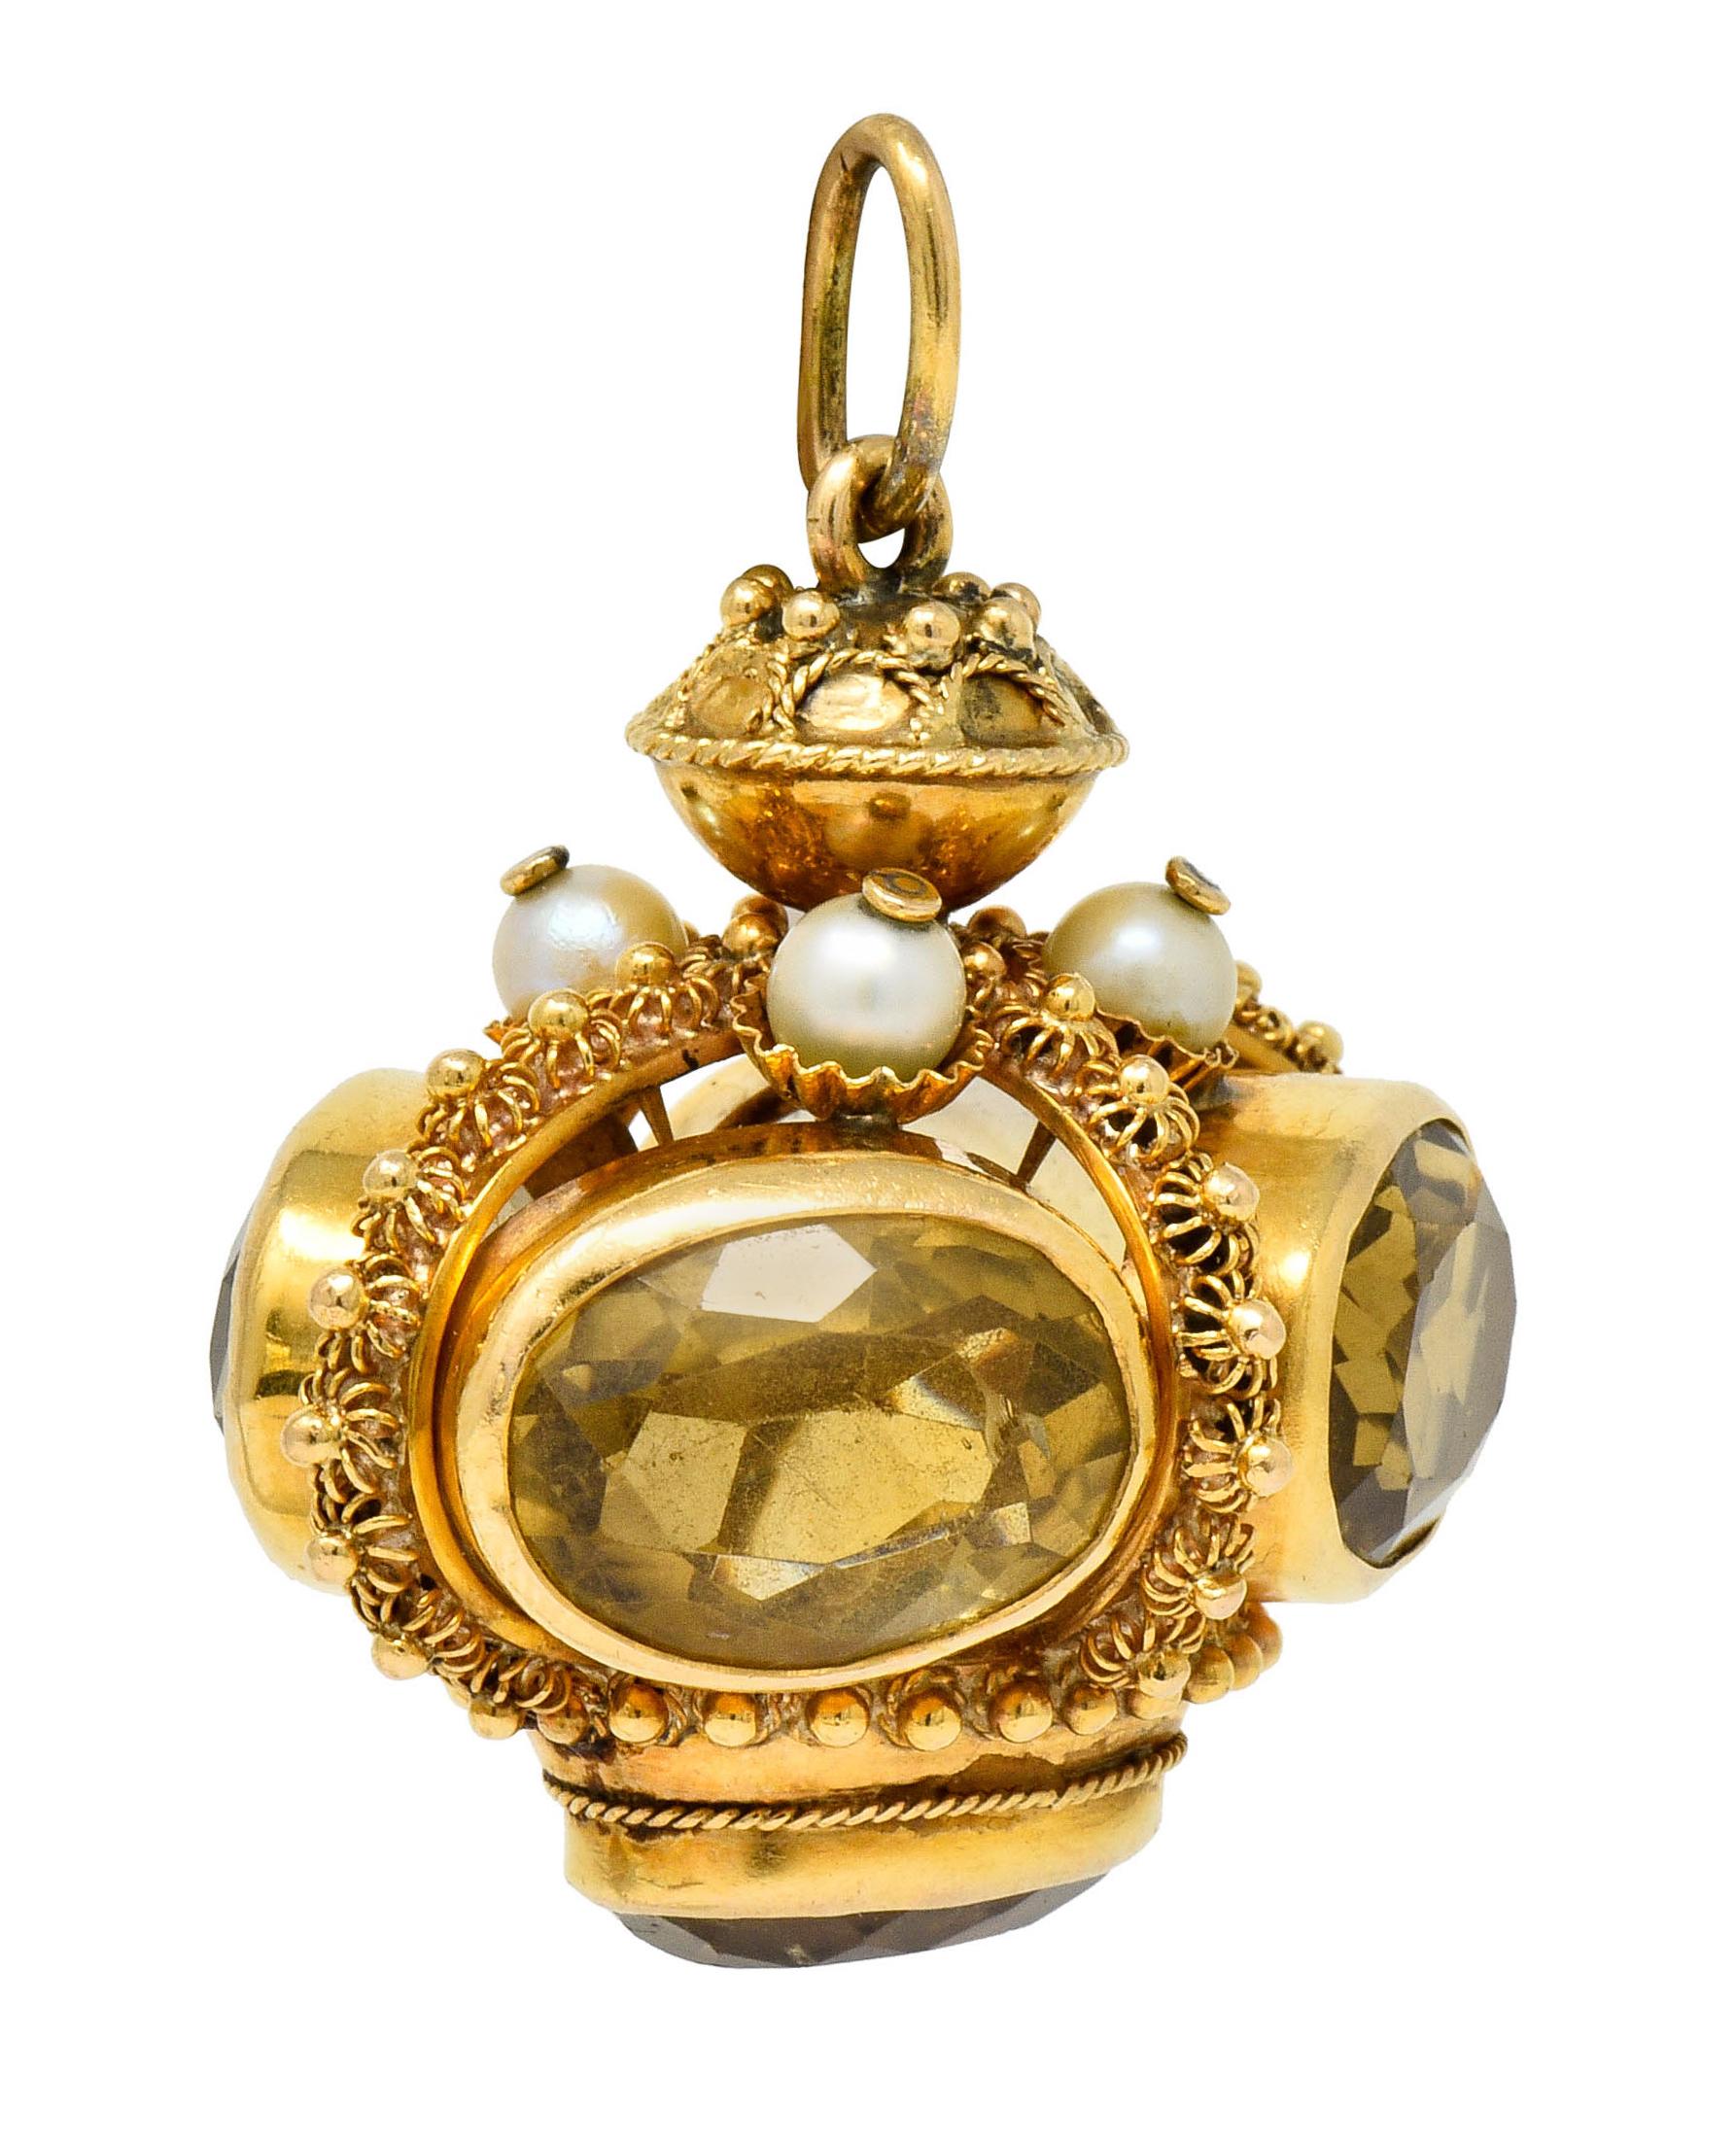 Designed as a crown-like form with four curved arches; decorated throughout by caged florals, polished gold beads, and a draped twisted rope motif

Featuring five oval cut citrine, bezel set, measuring approximately 15.0 x 11.2 mm; transparent and a